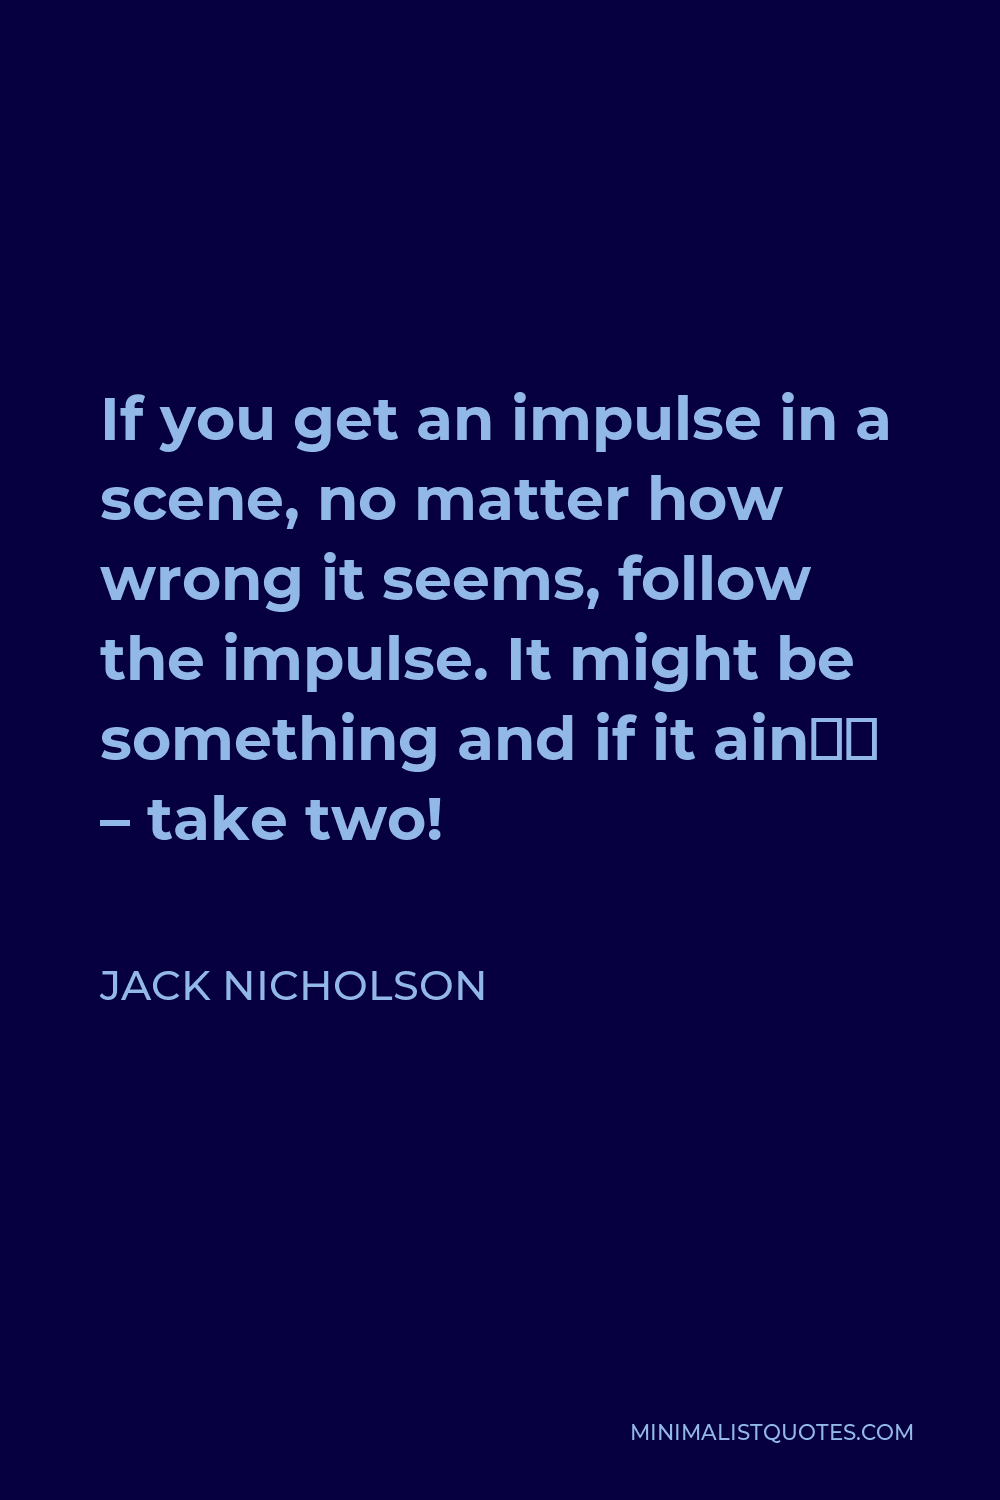 Jack Nicholson Quote - If you get an impulse in a scene, no matter how wrong it seems, follow the impulse. It might be something and if it ain’t – take two!